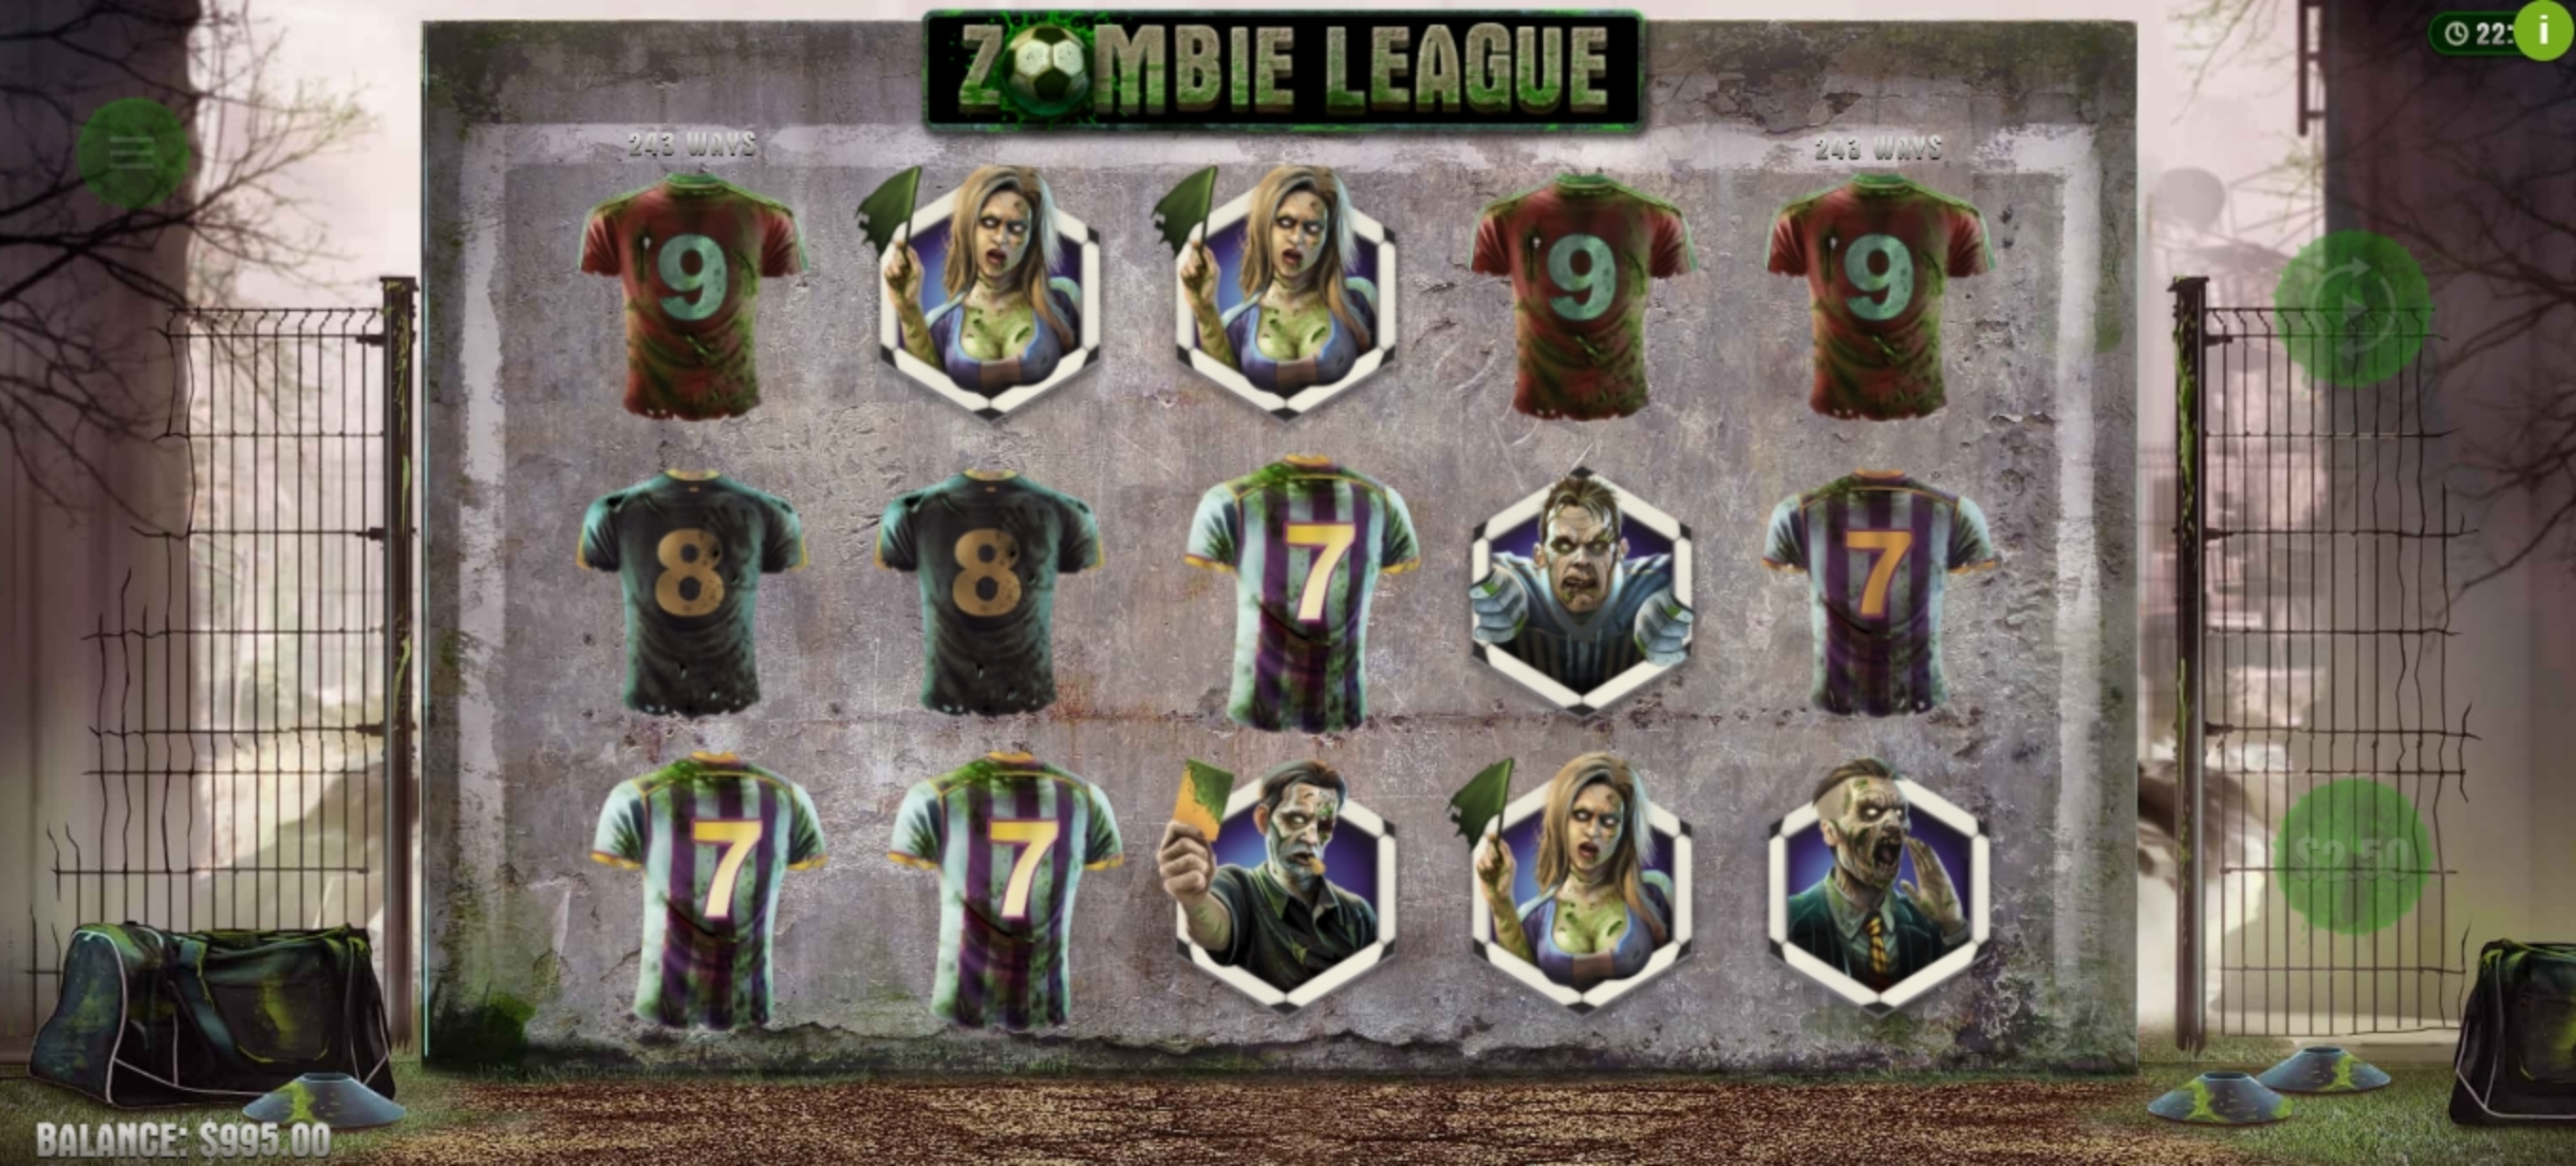 Win Money in Zombie League Free Slot Game by Woohoo